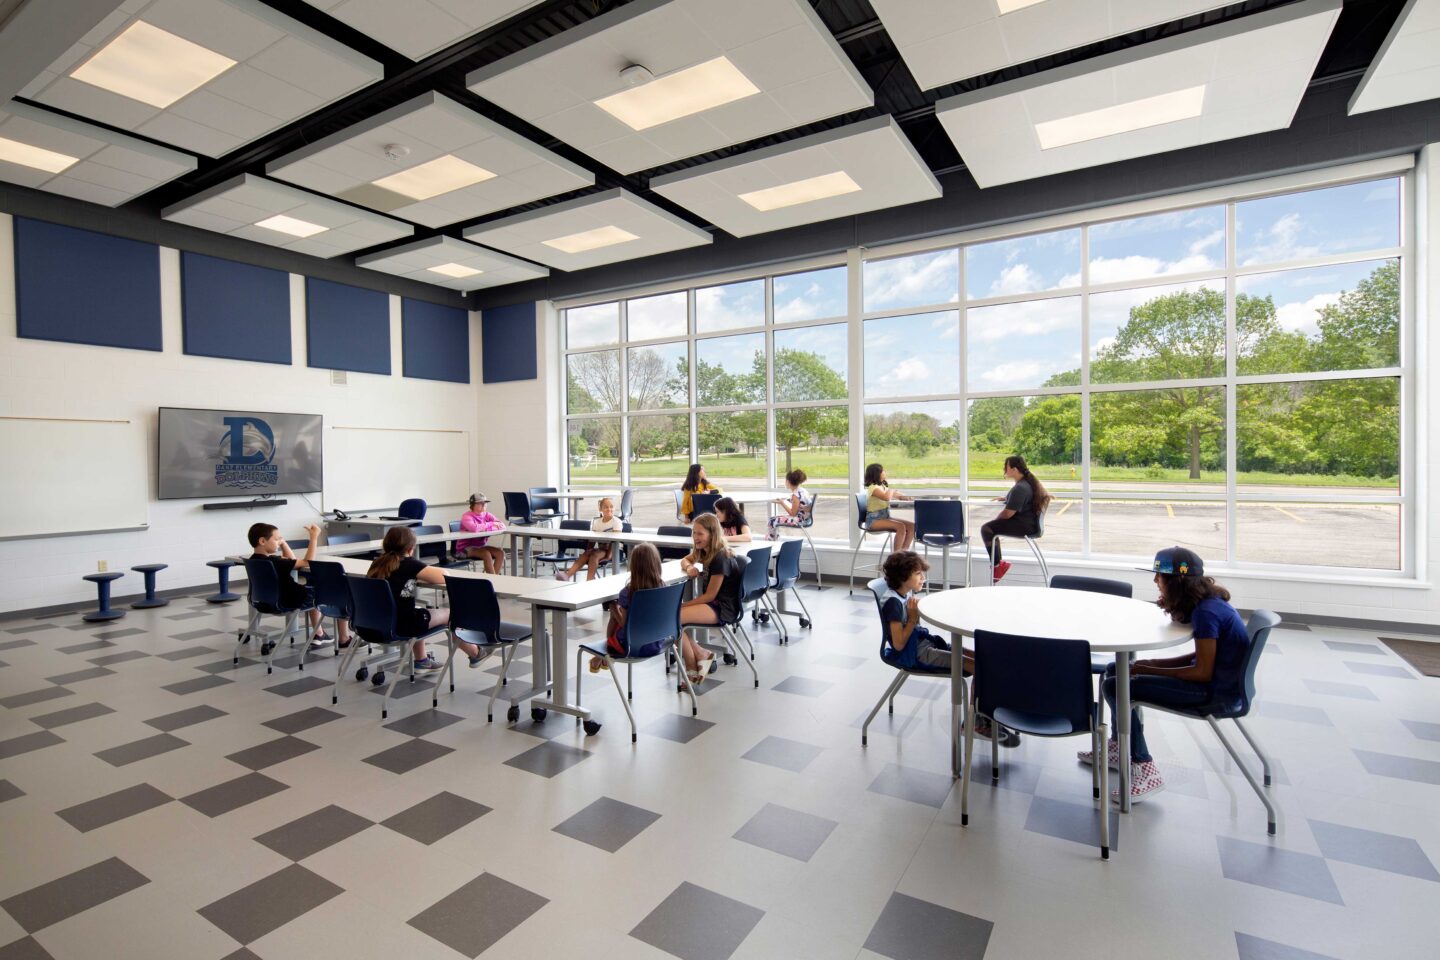 Danz Elementary School community room with students sitting and talking